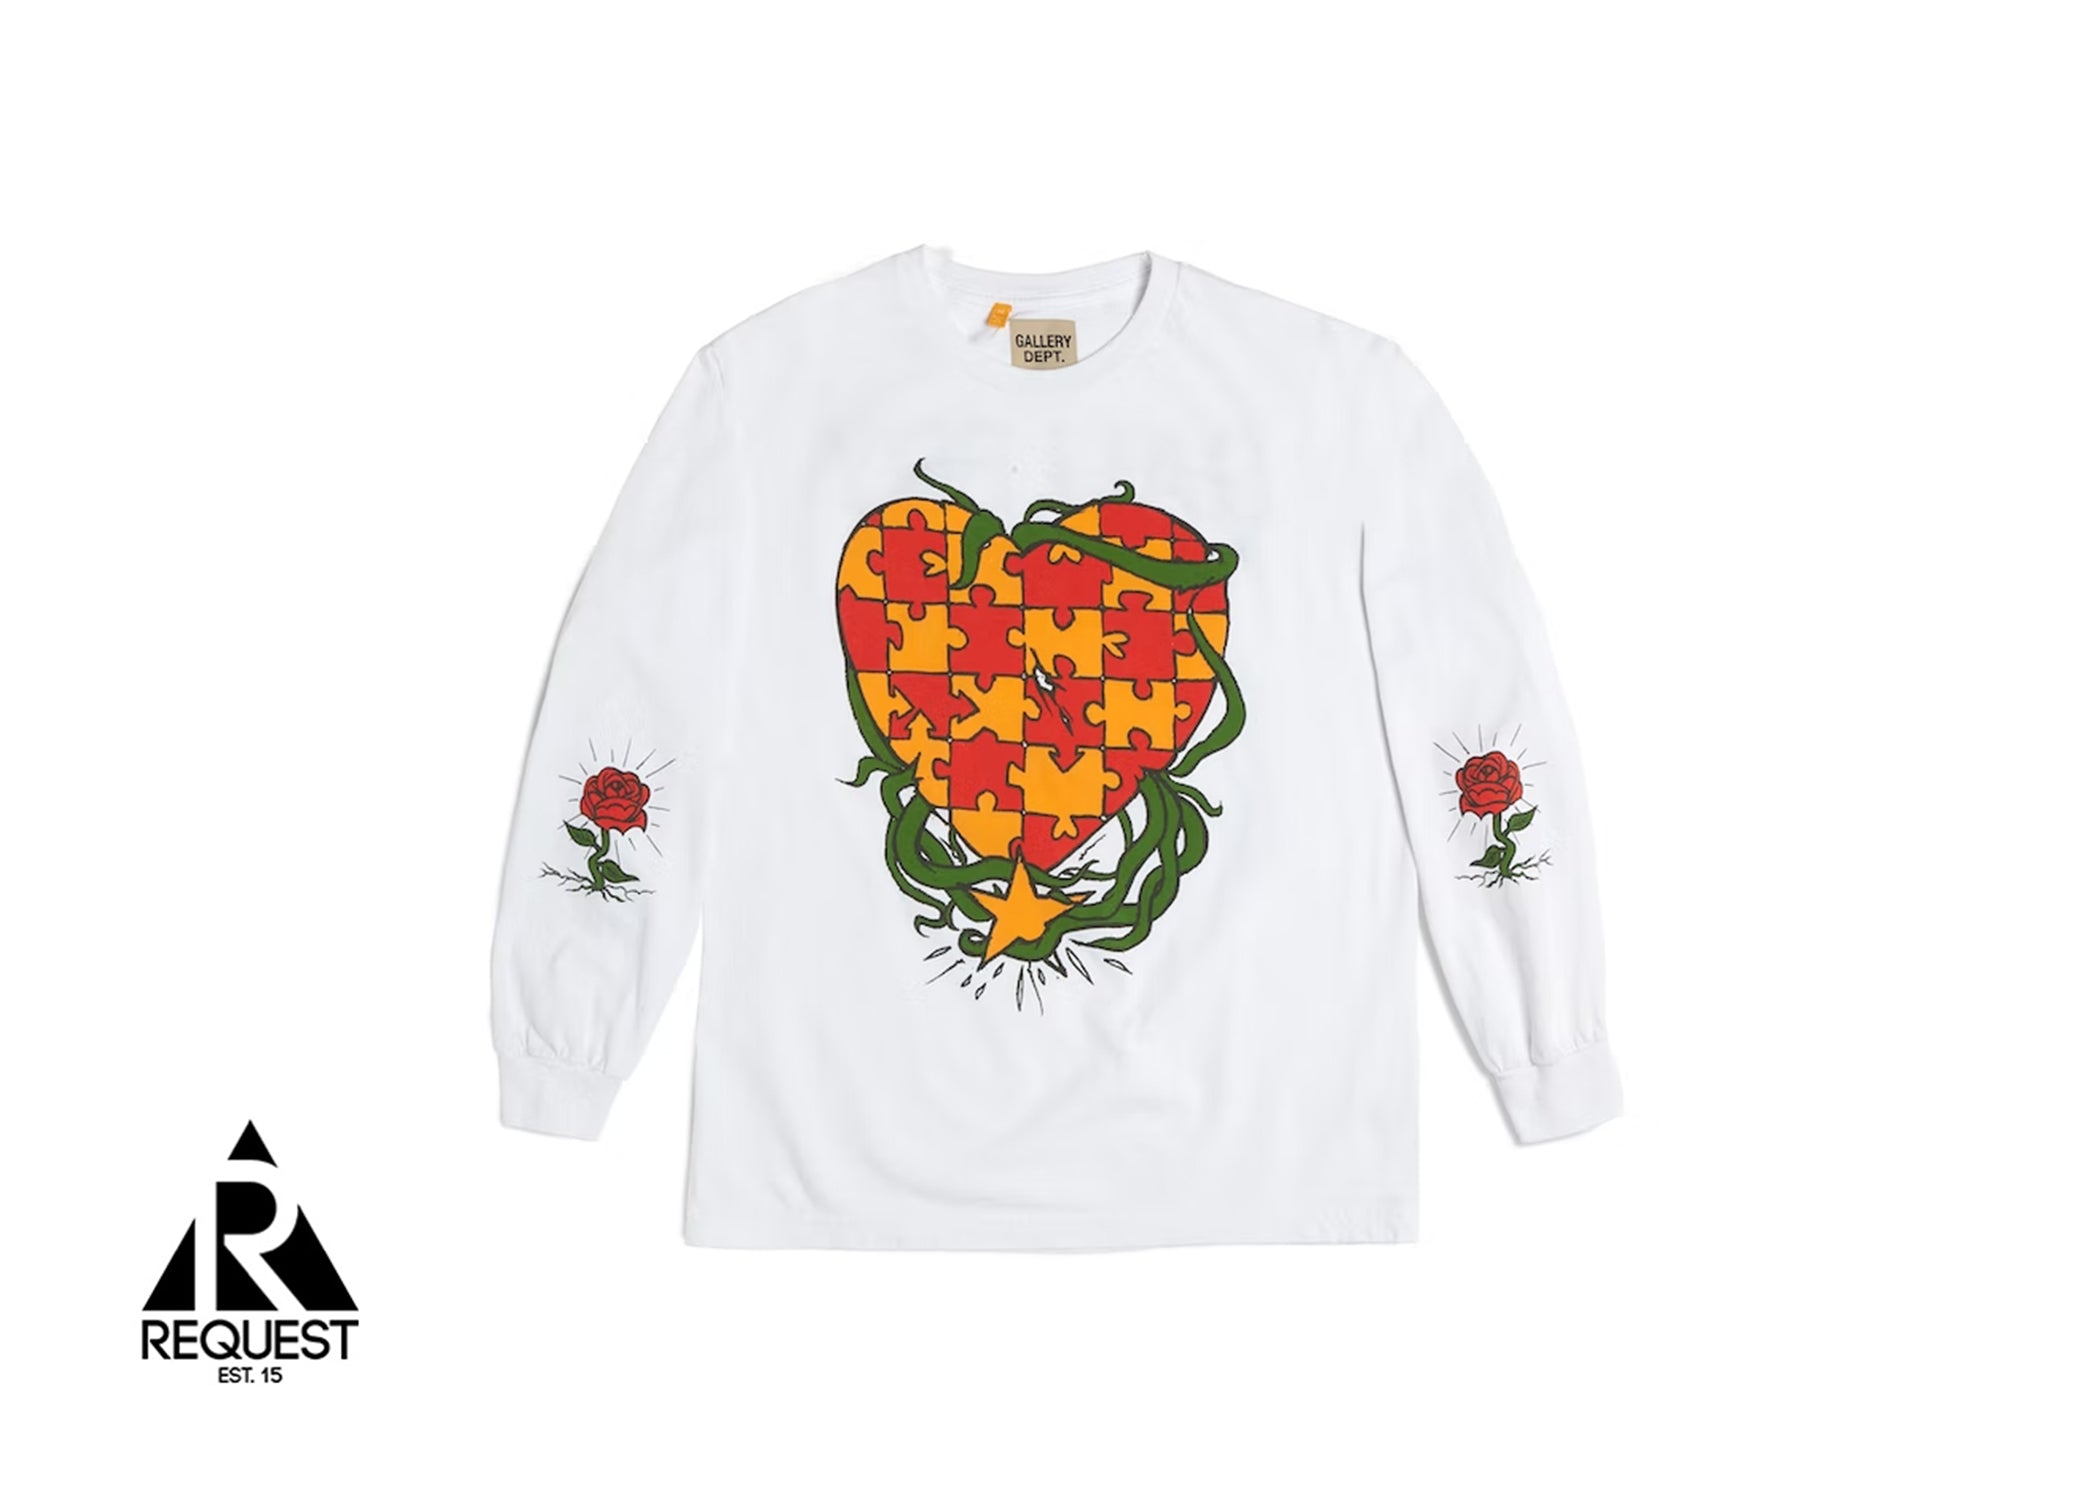 Gallery Dept. Heart Puzzle L/S Tee "White"